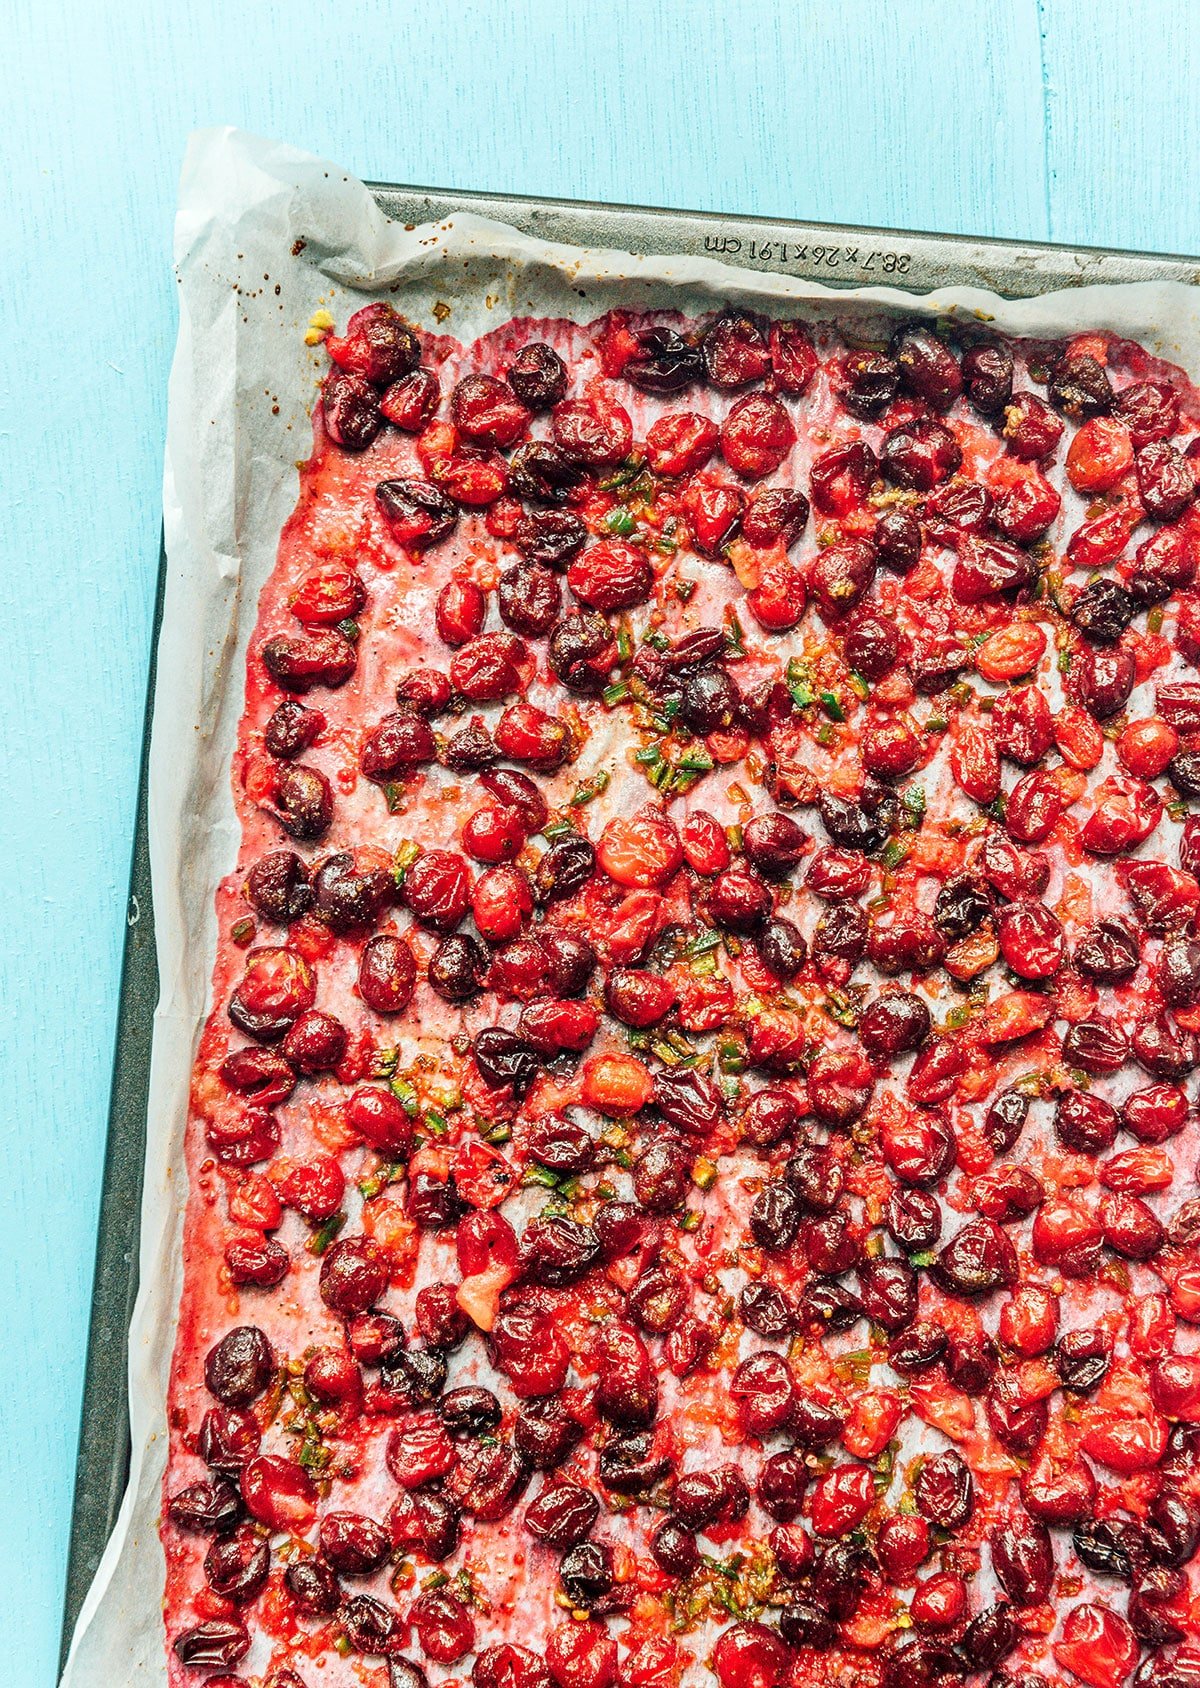 A baking sheet filled with roasted cranberries